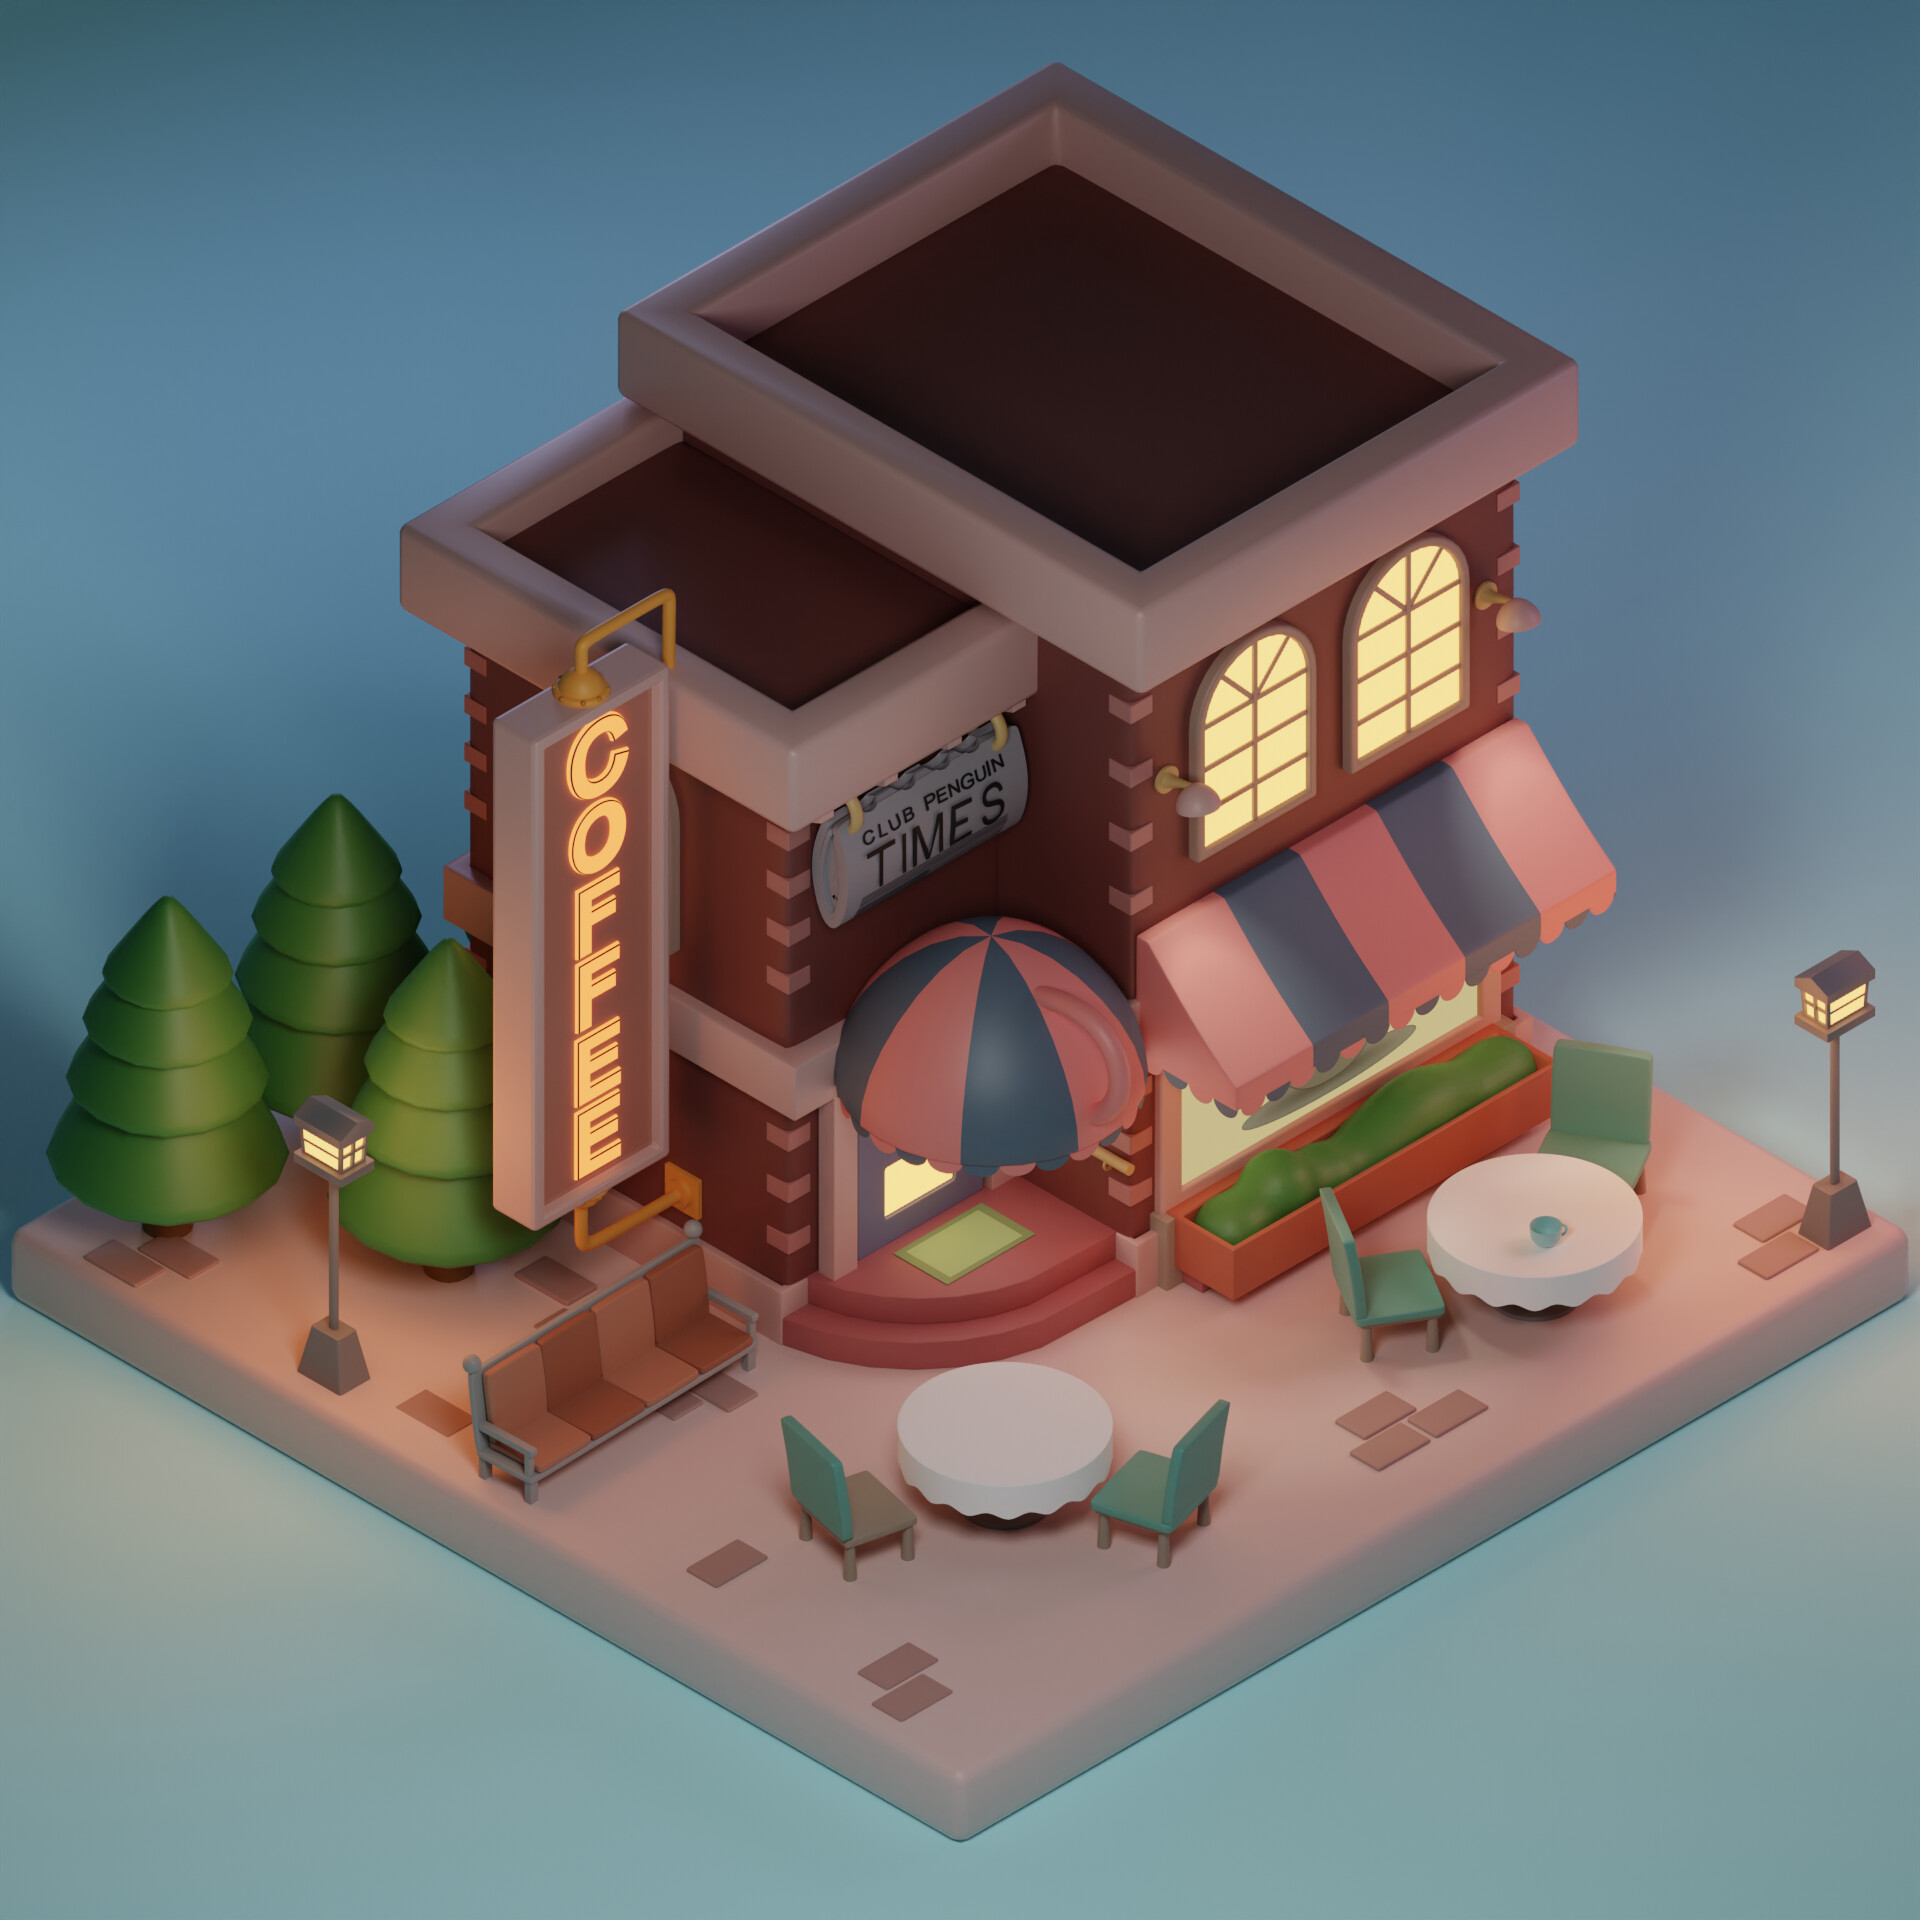 Club Penguin Coffee Shop - Finished Projects - Blender Artists Community